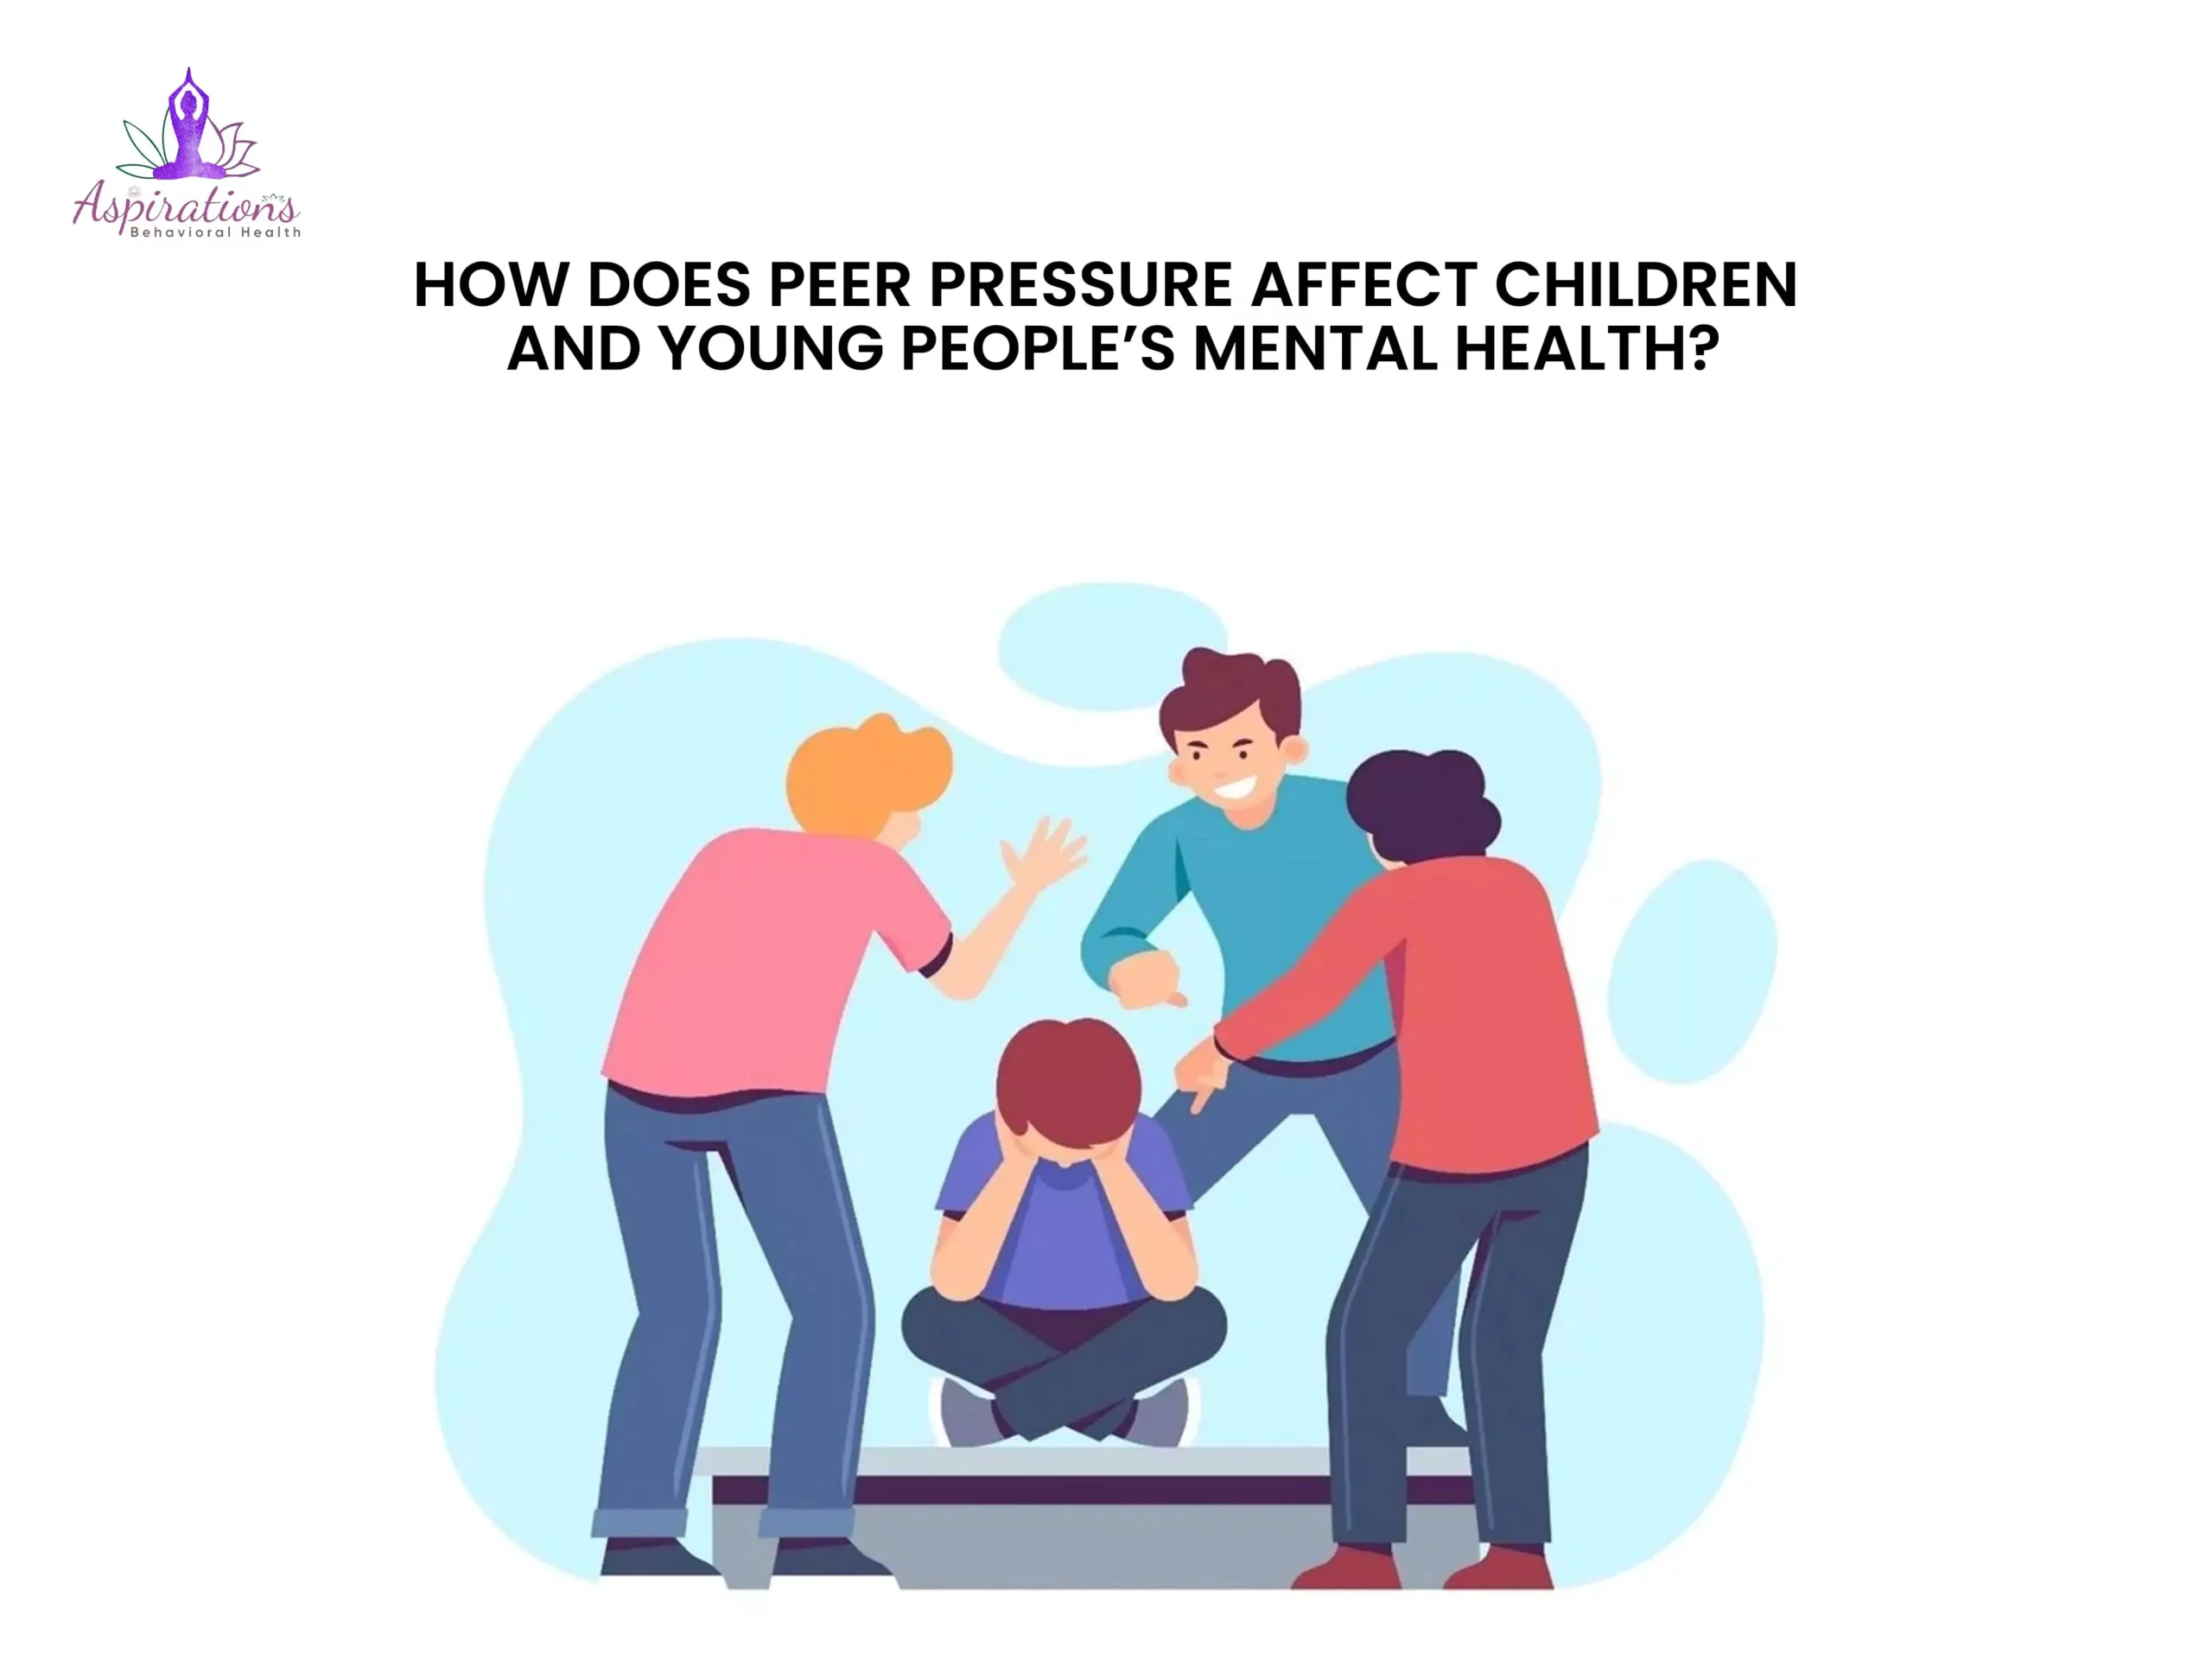 How Does Peer Pressure Affect Children and Young People's Mental Health?